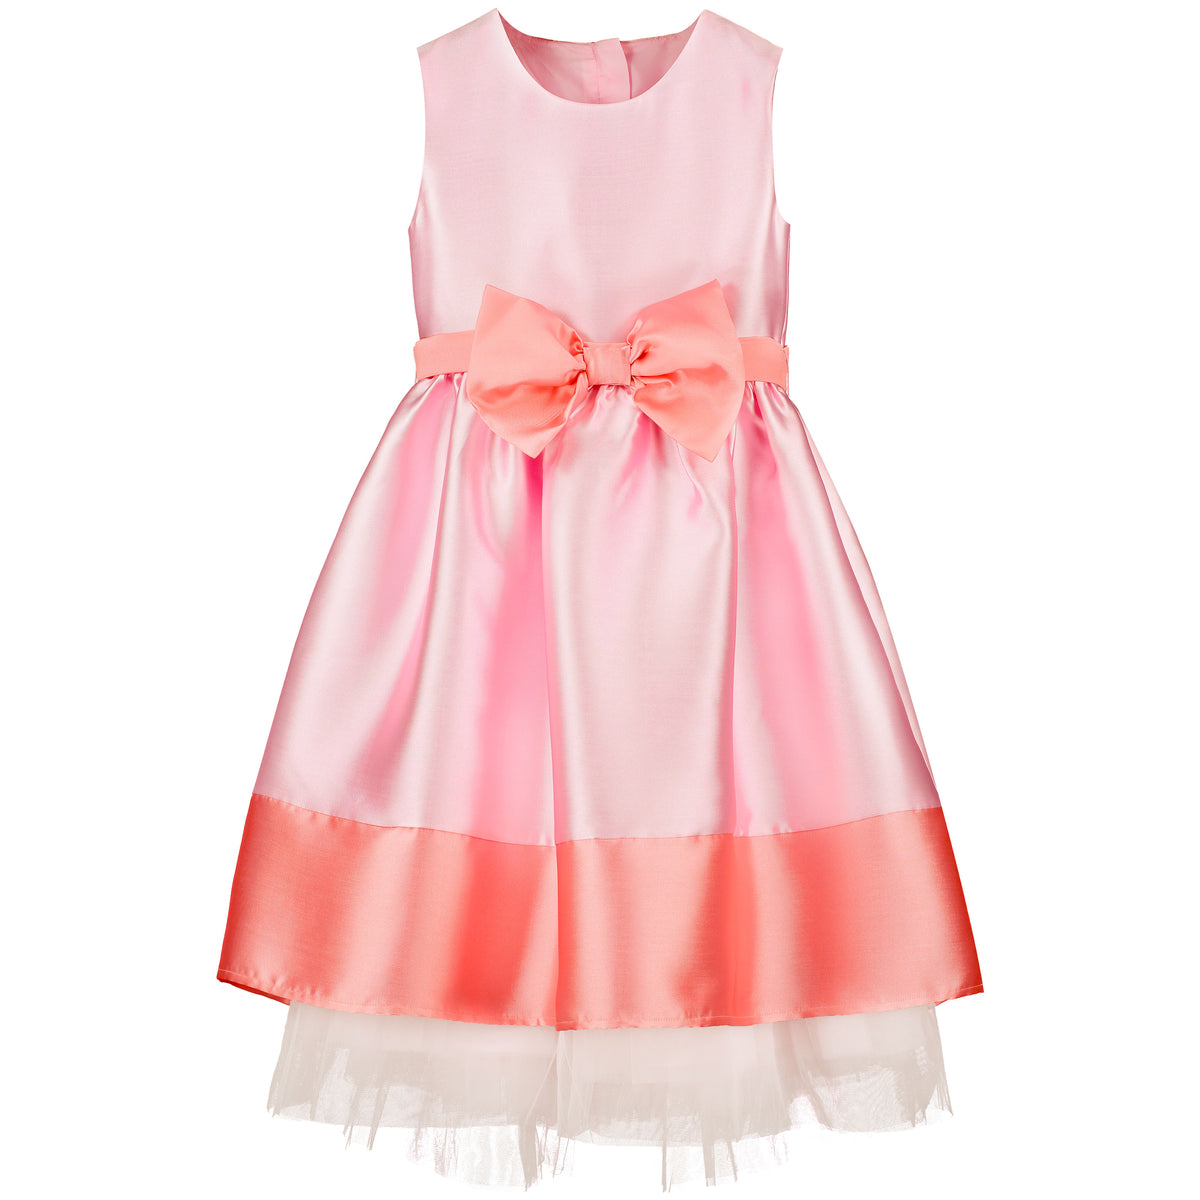 Girls Party Dress Florence Candy Pink Taffeta Bow | Holly Hastie London  Edit alt text